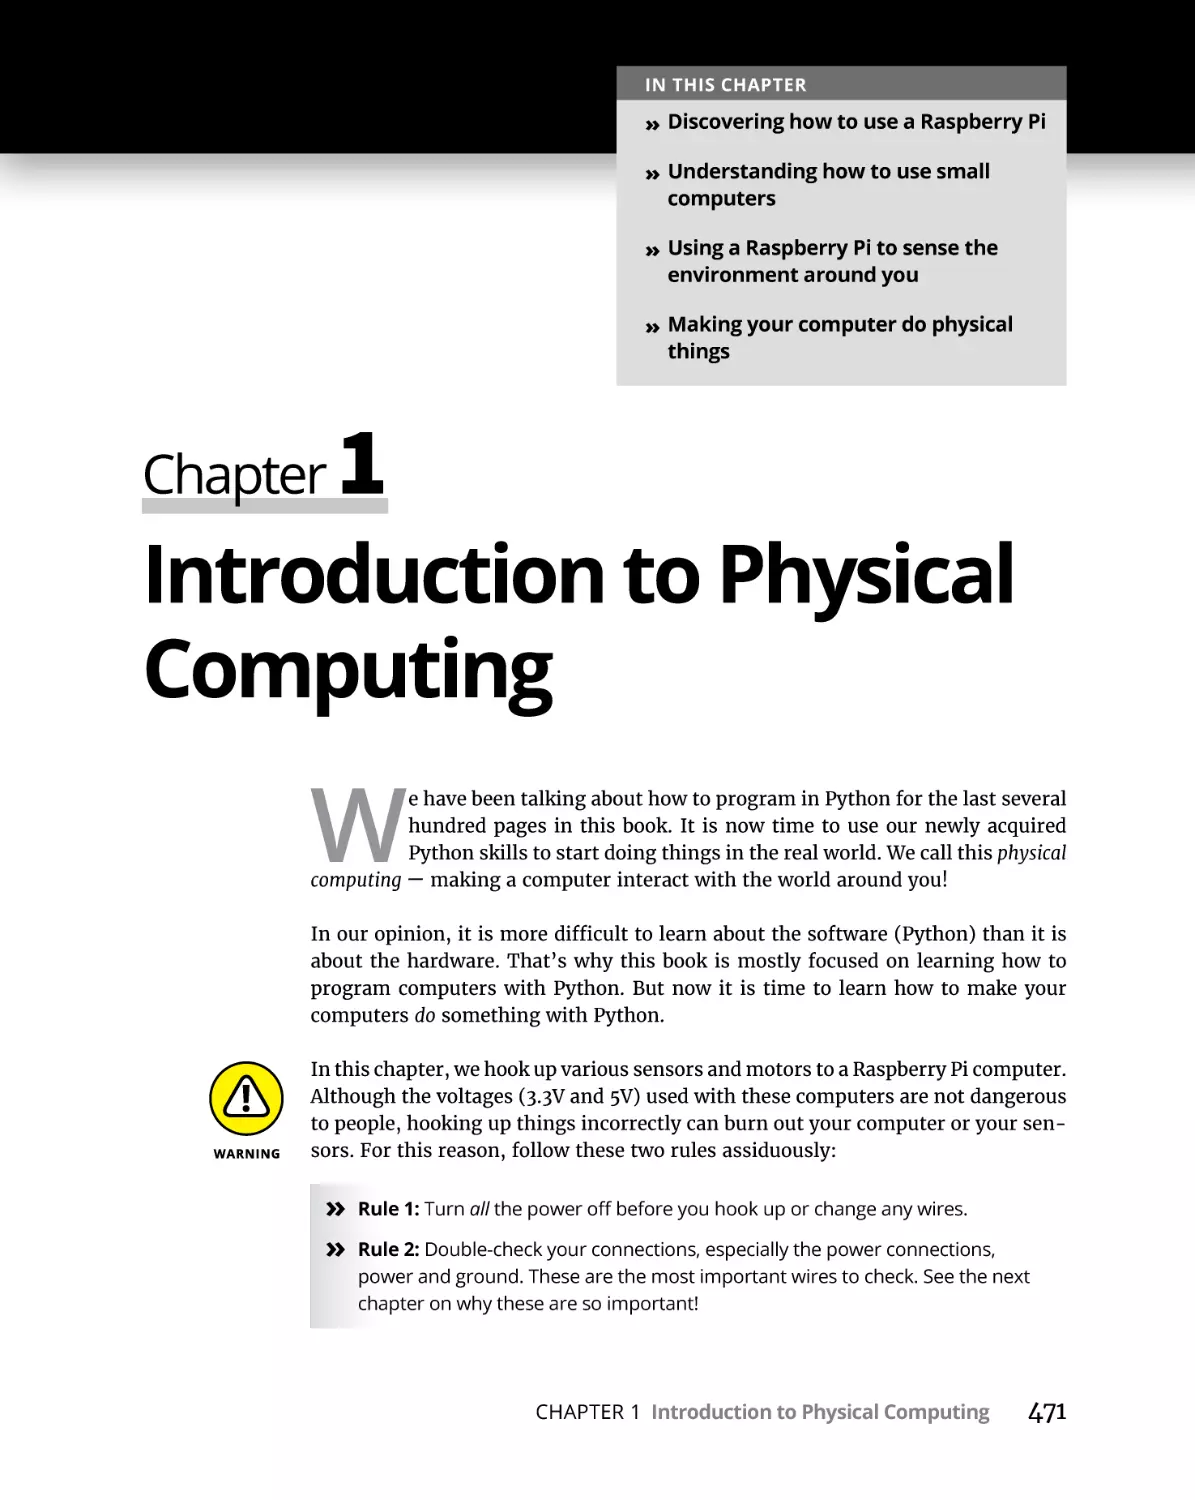 Chapter 1 Introduction to Physical Computing